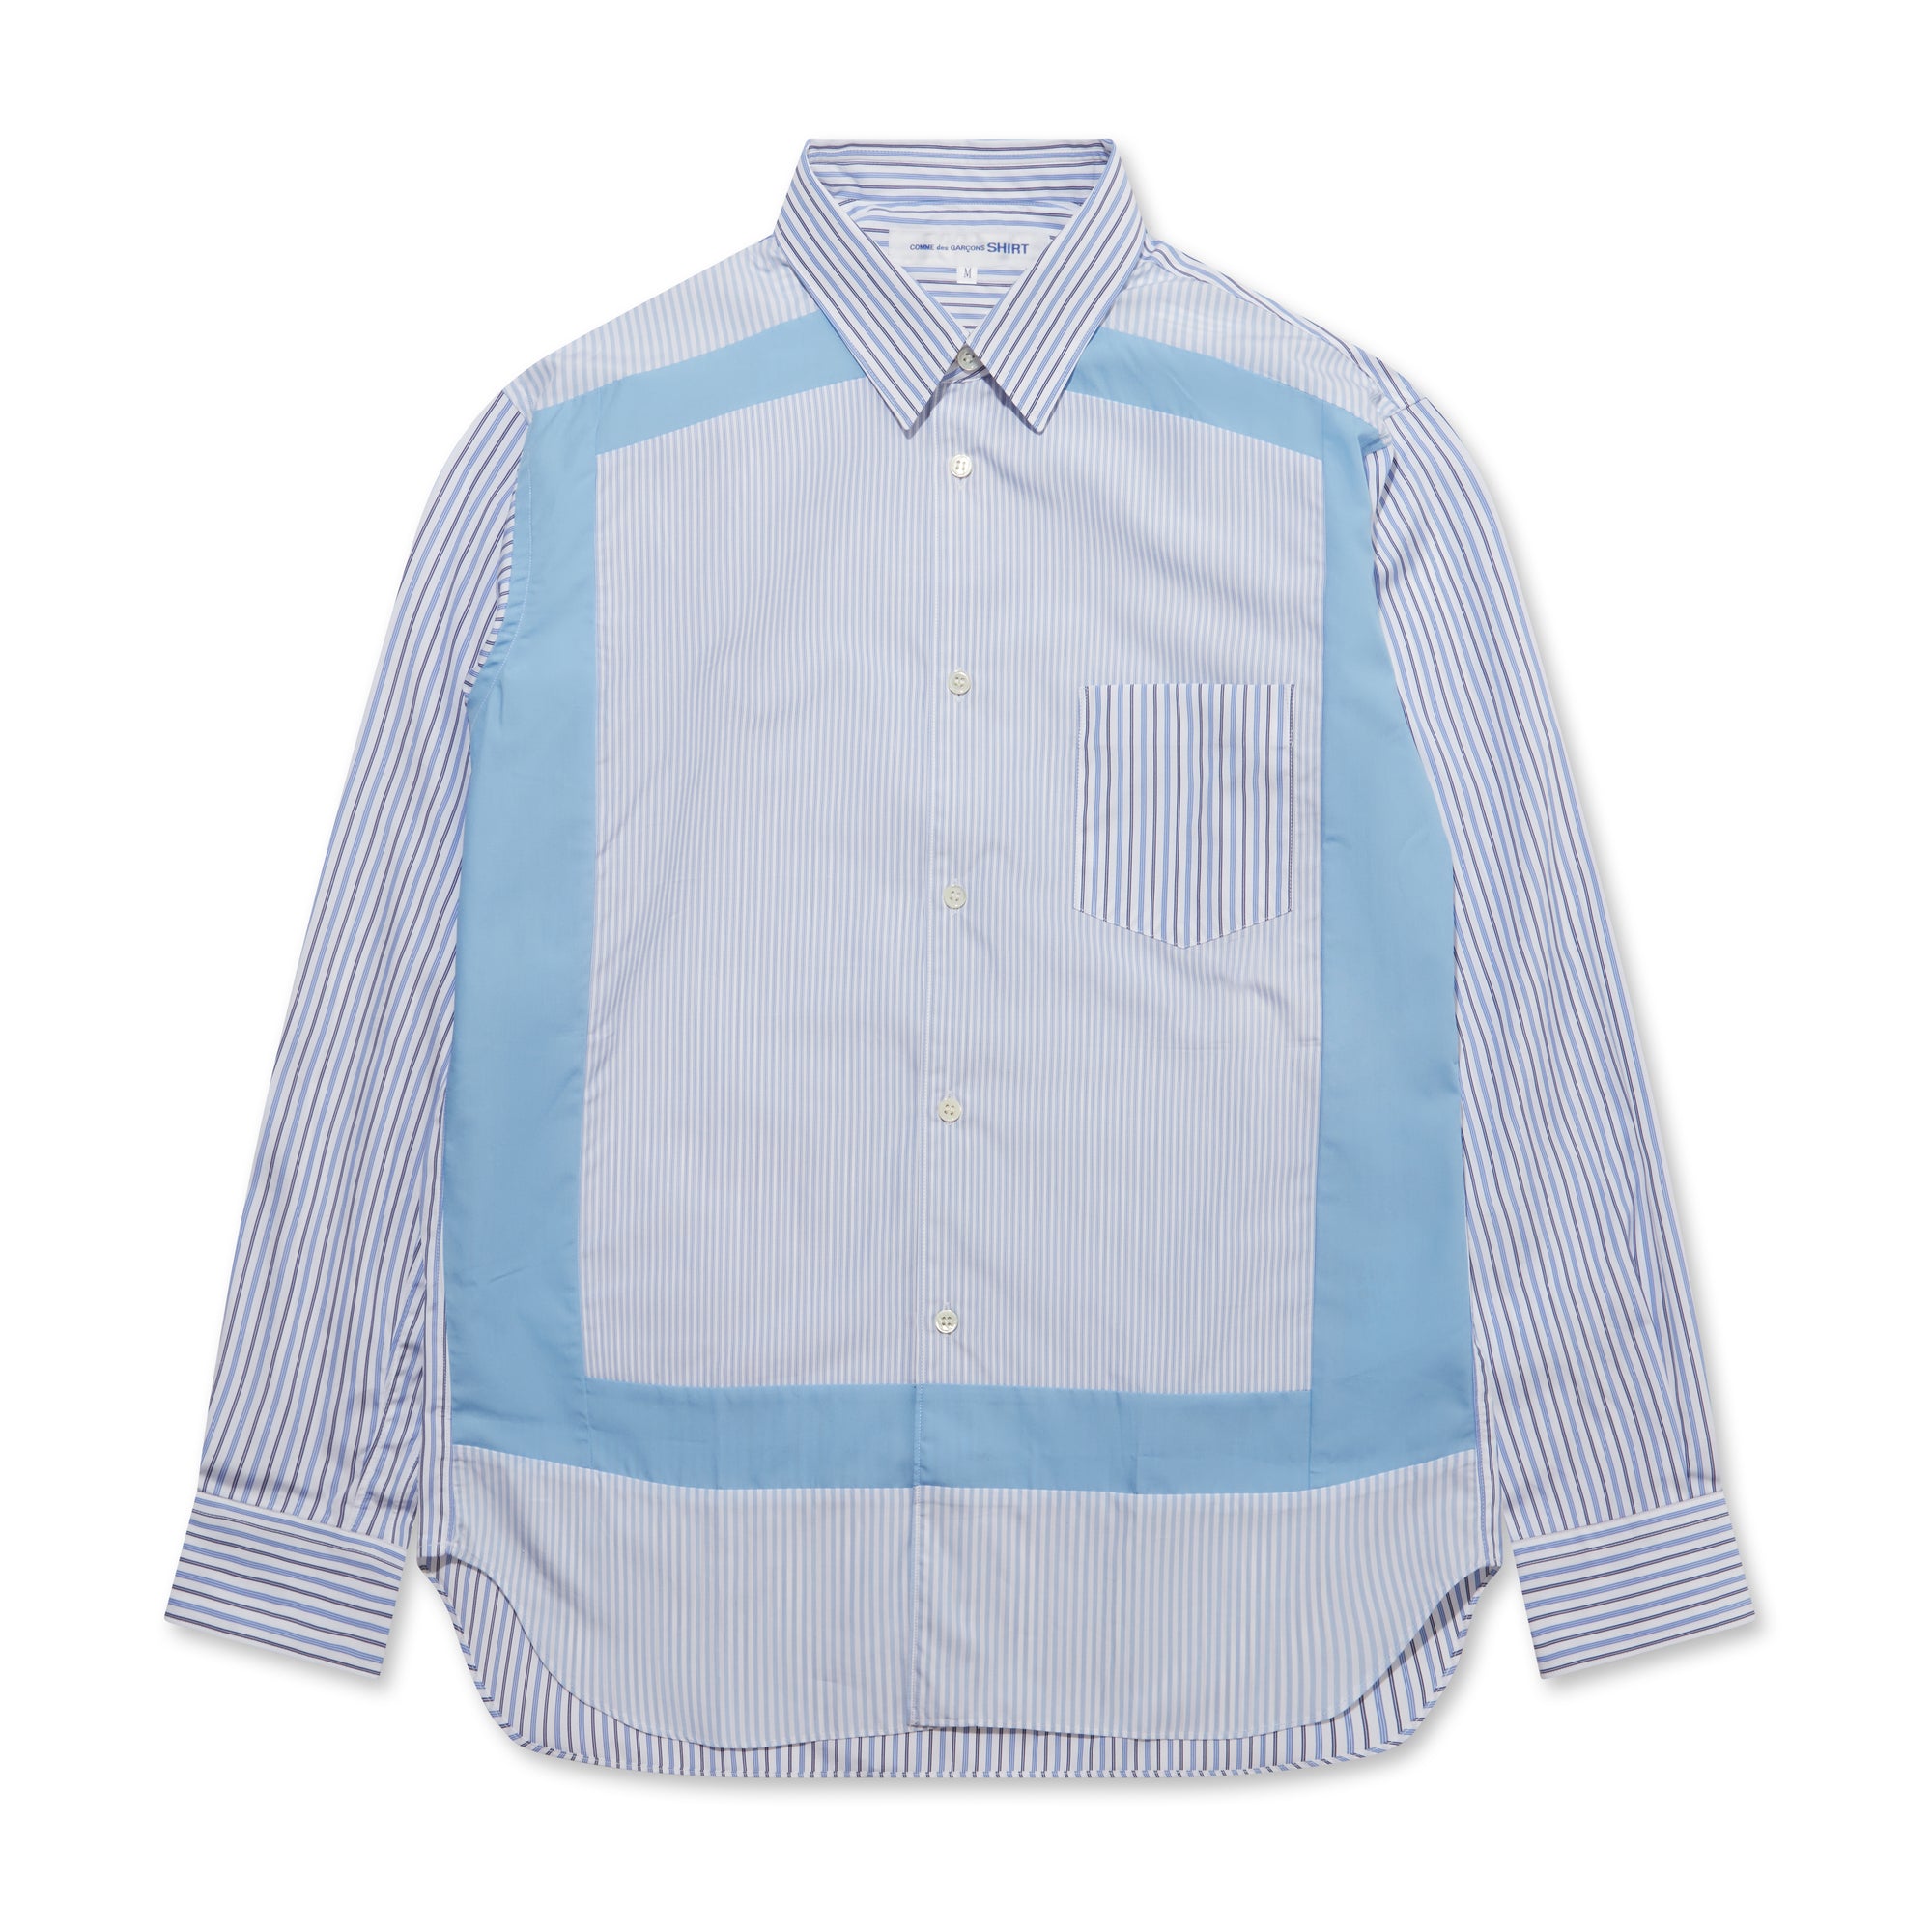 CDG Shirt Forever - Classic Fit Contrast Stripe Shirt - (Stripe/Mix) view 1